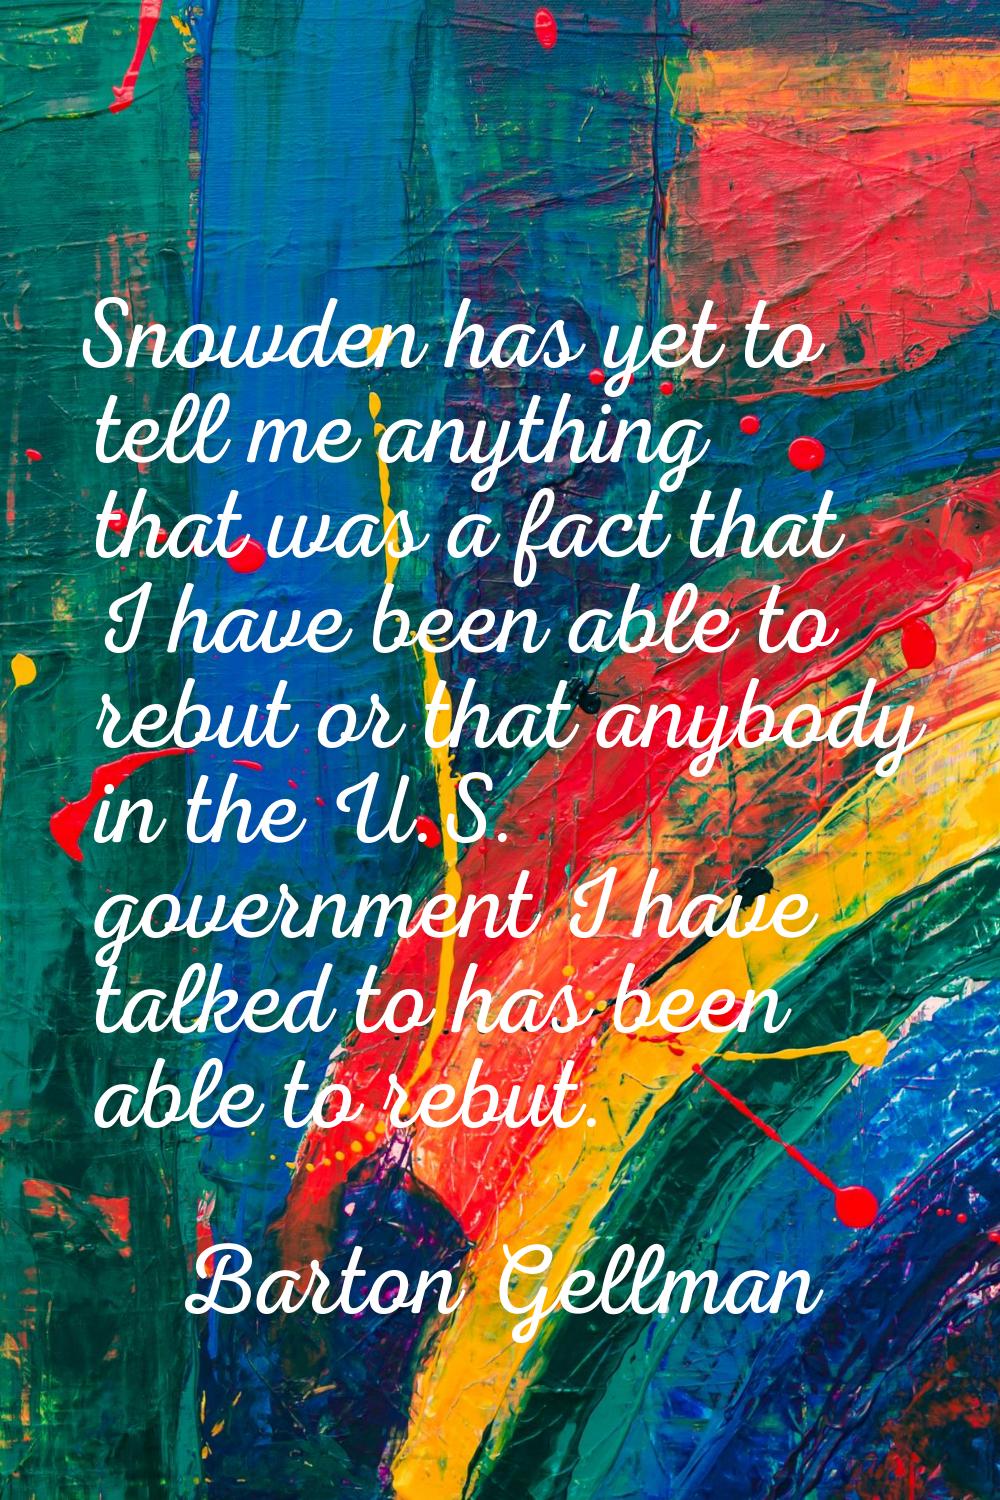 Snowden has yet to tell me anything that was a fact that I have been able to rebut or that anybody 